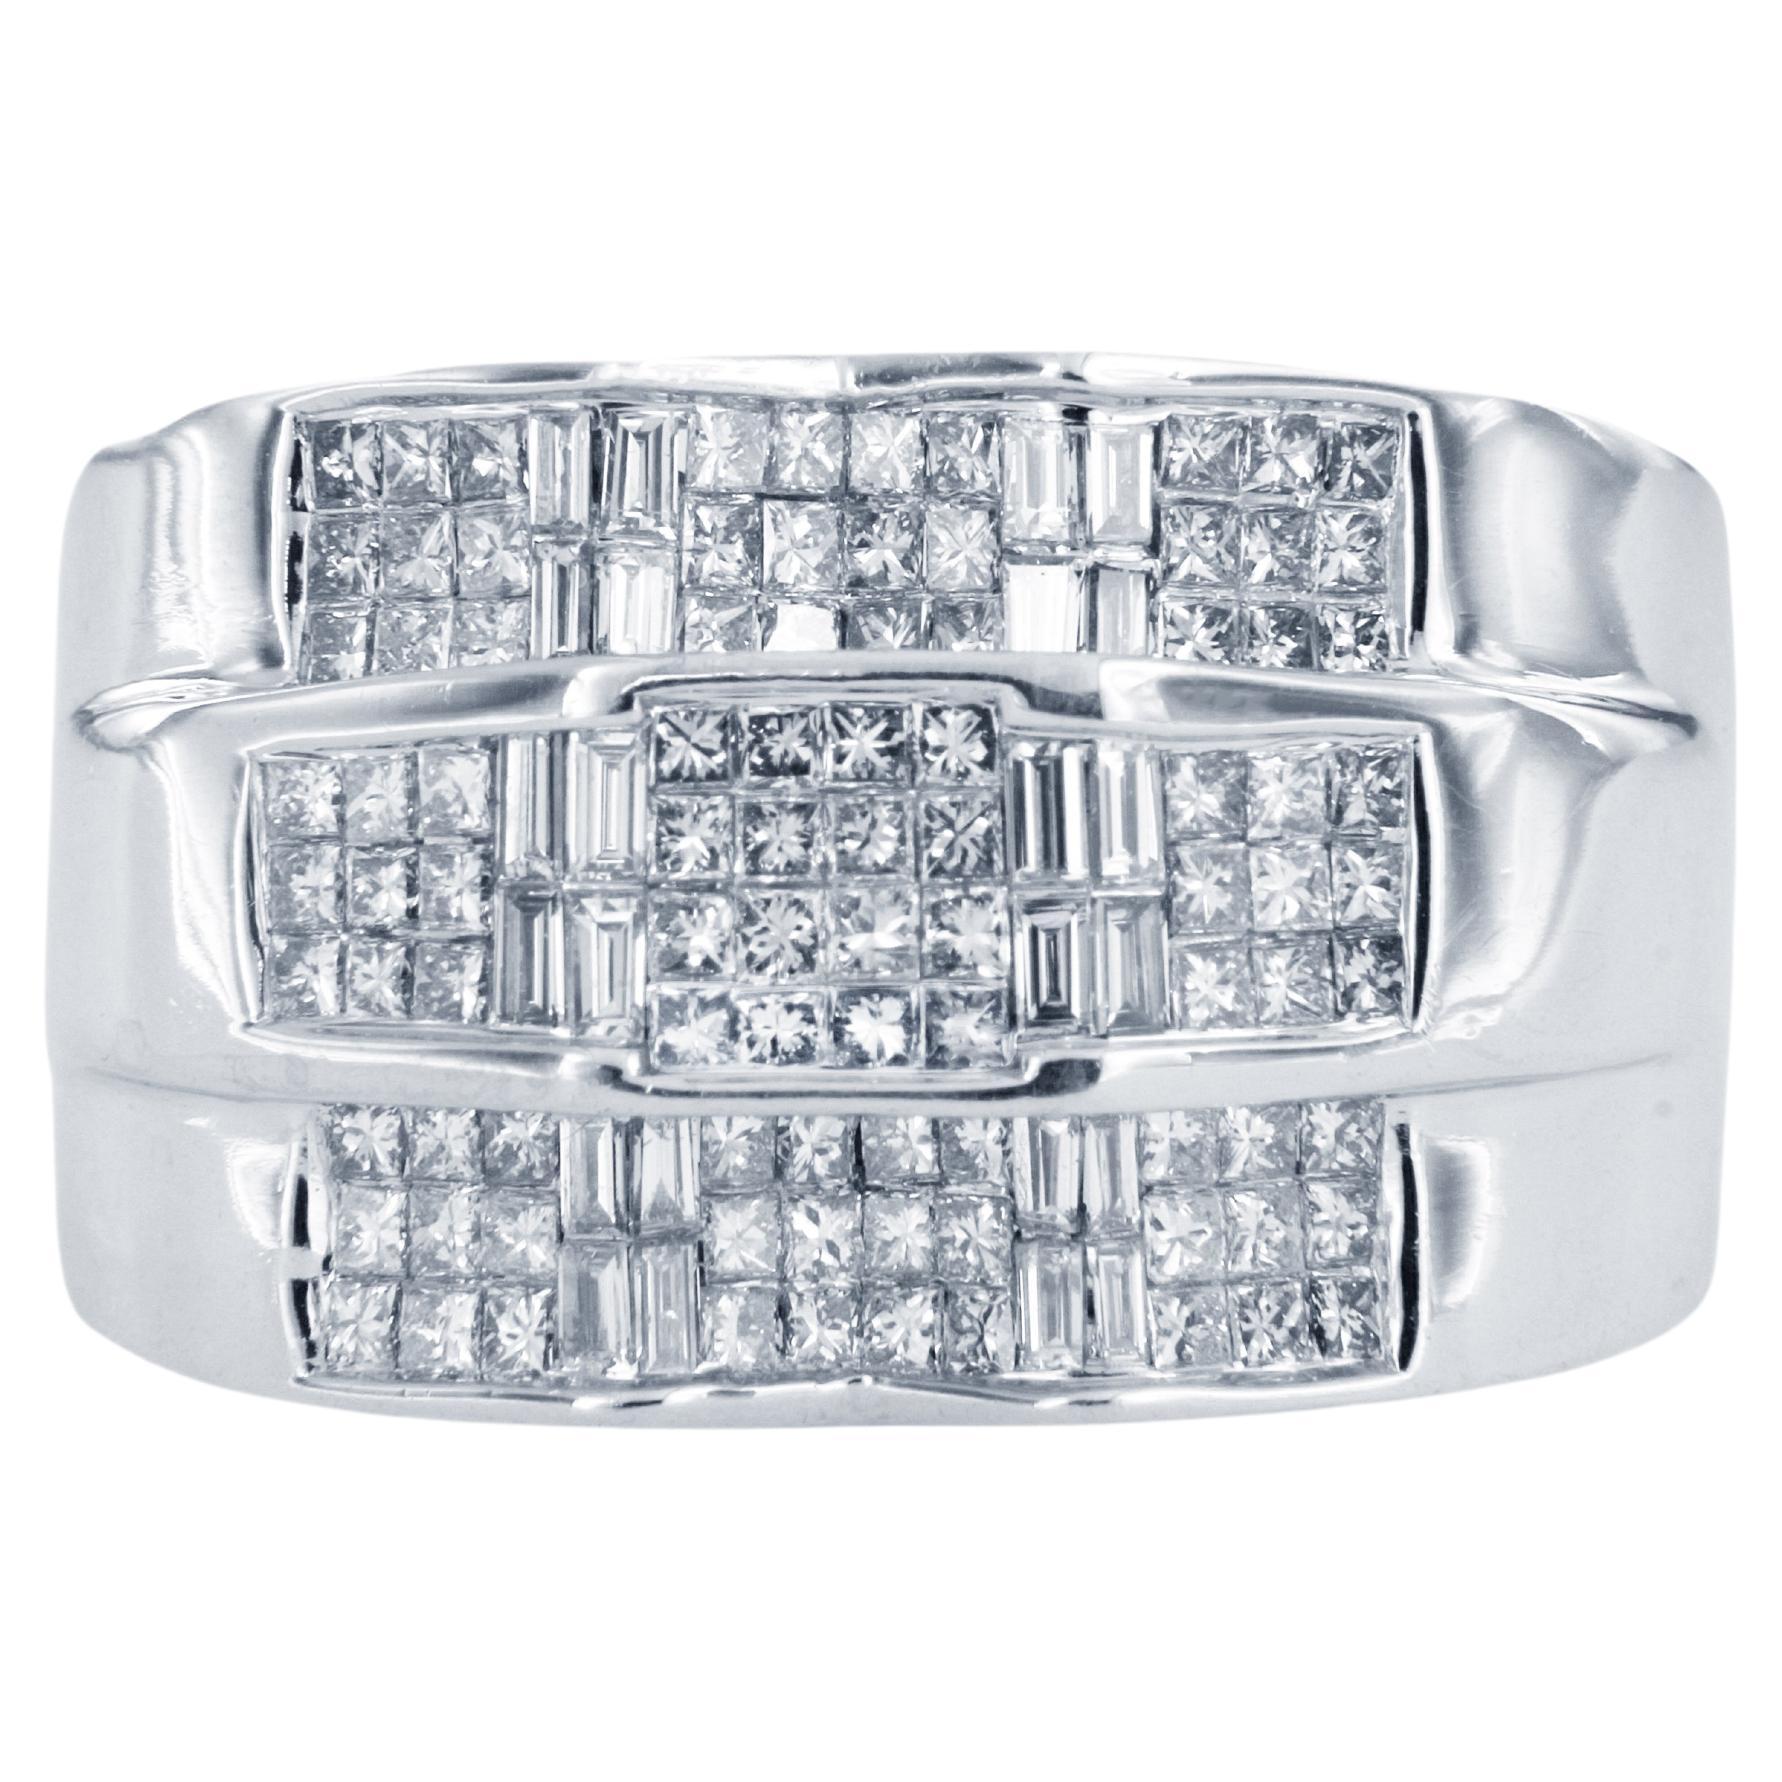 Three level 14k White Gold Ring with 3.5ct Diamonds, VS/G For Sale